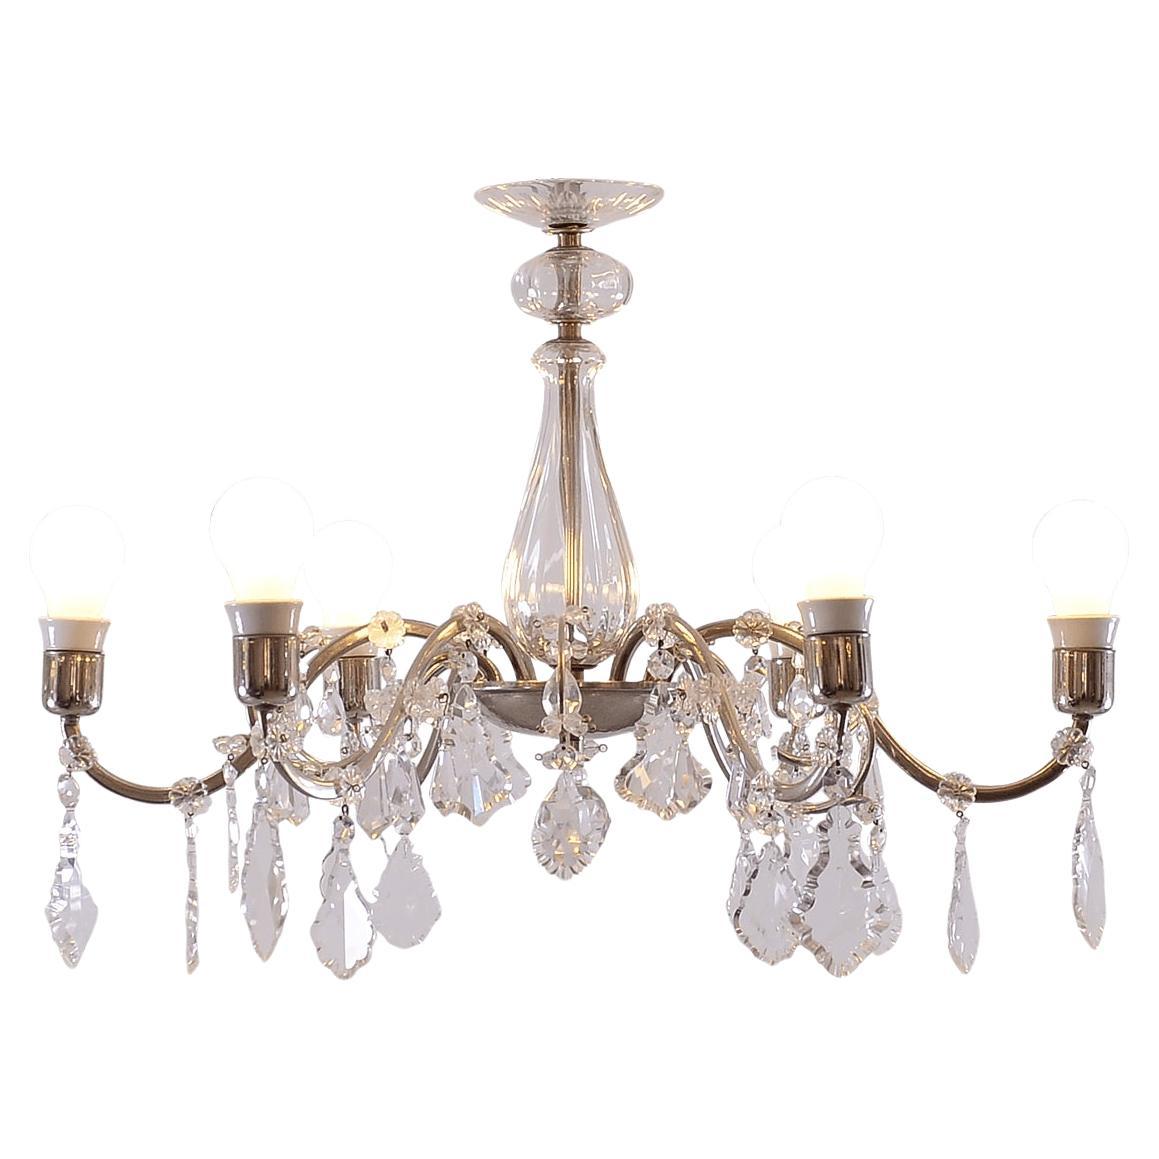 Original Mid-Century Modern Brass and Crystal Glass Chandelier For Sale